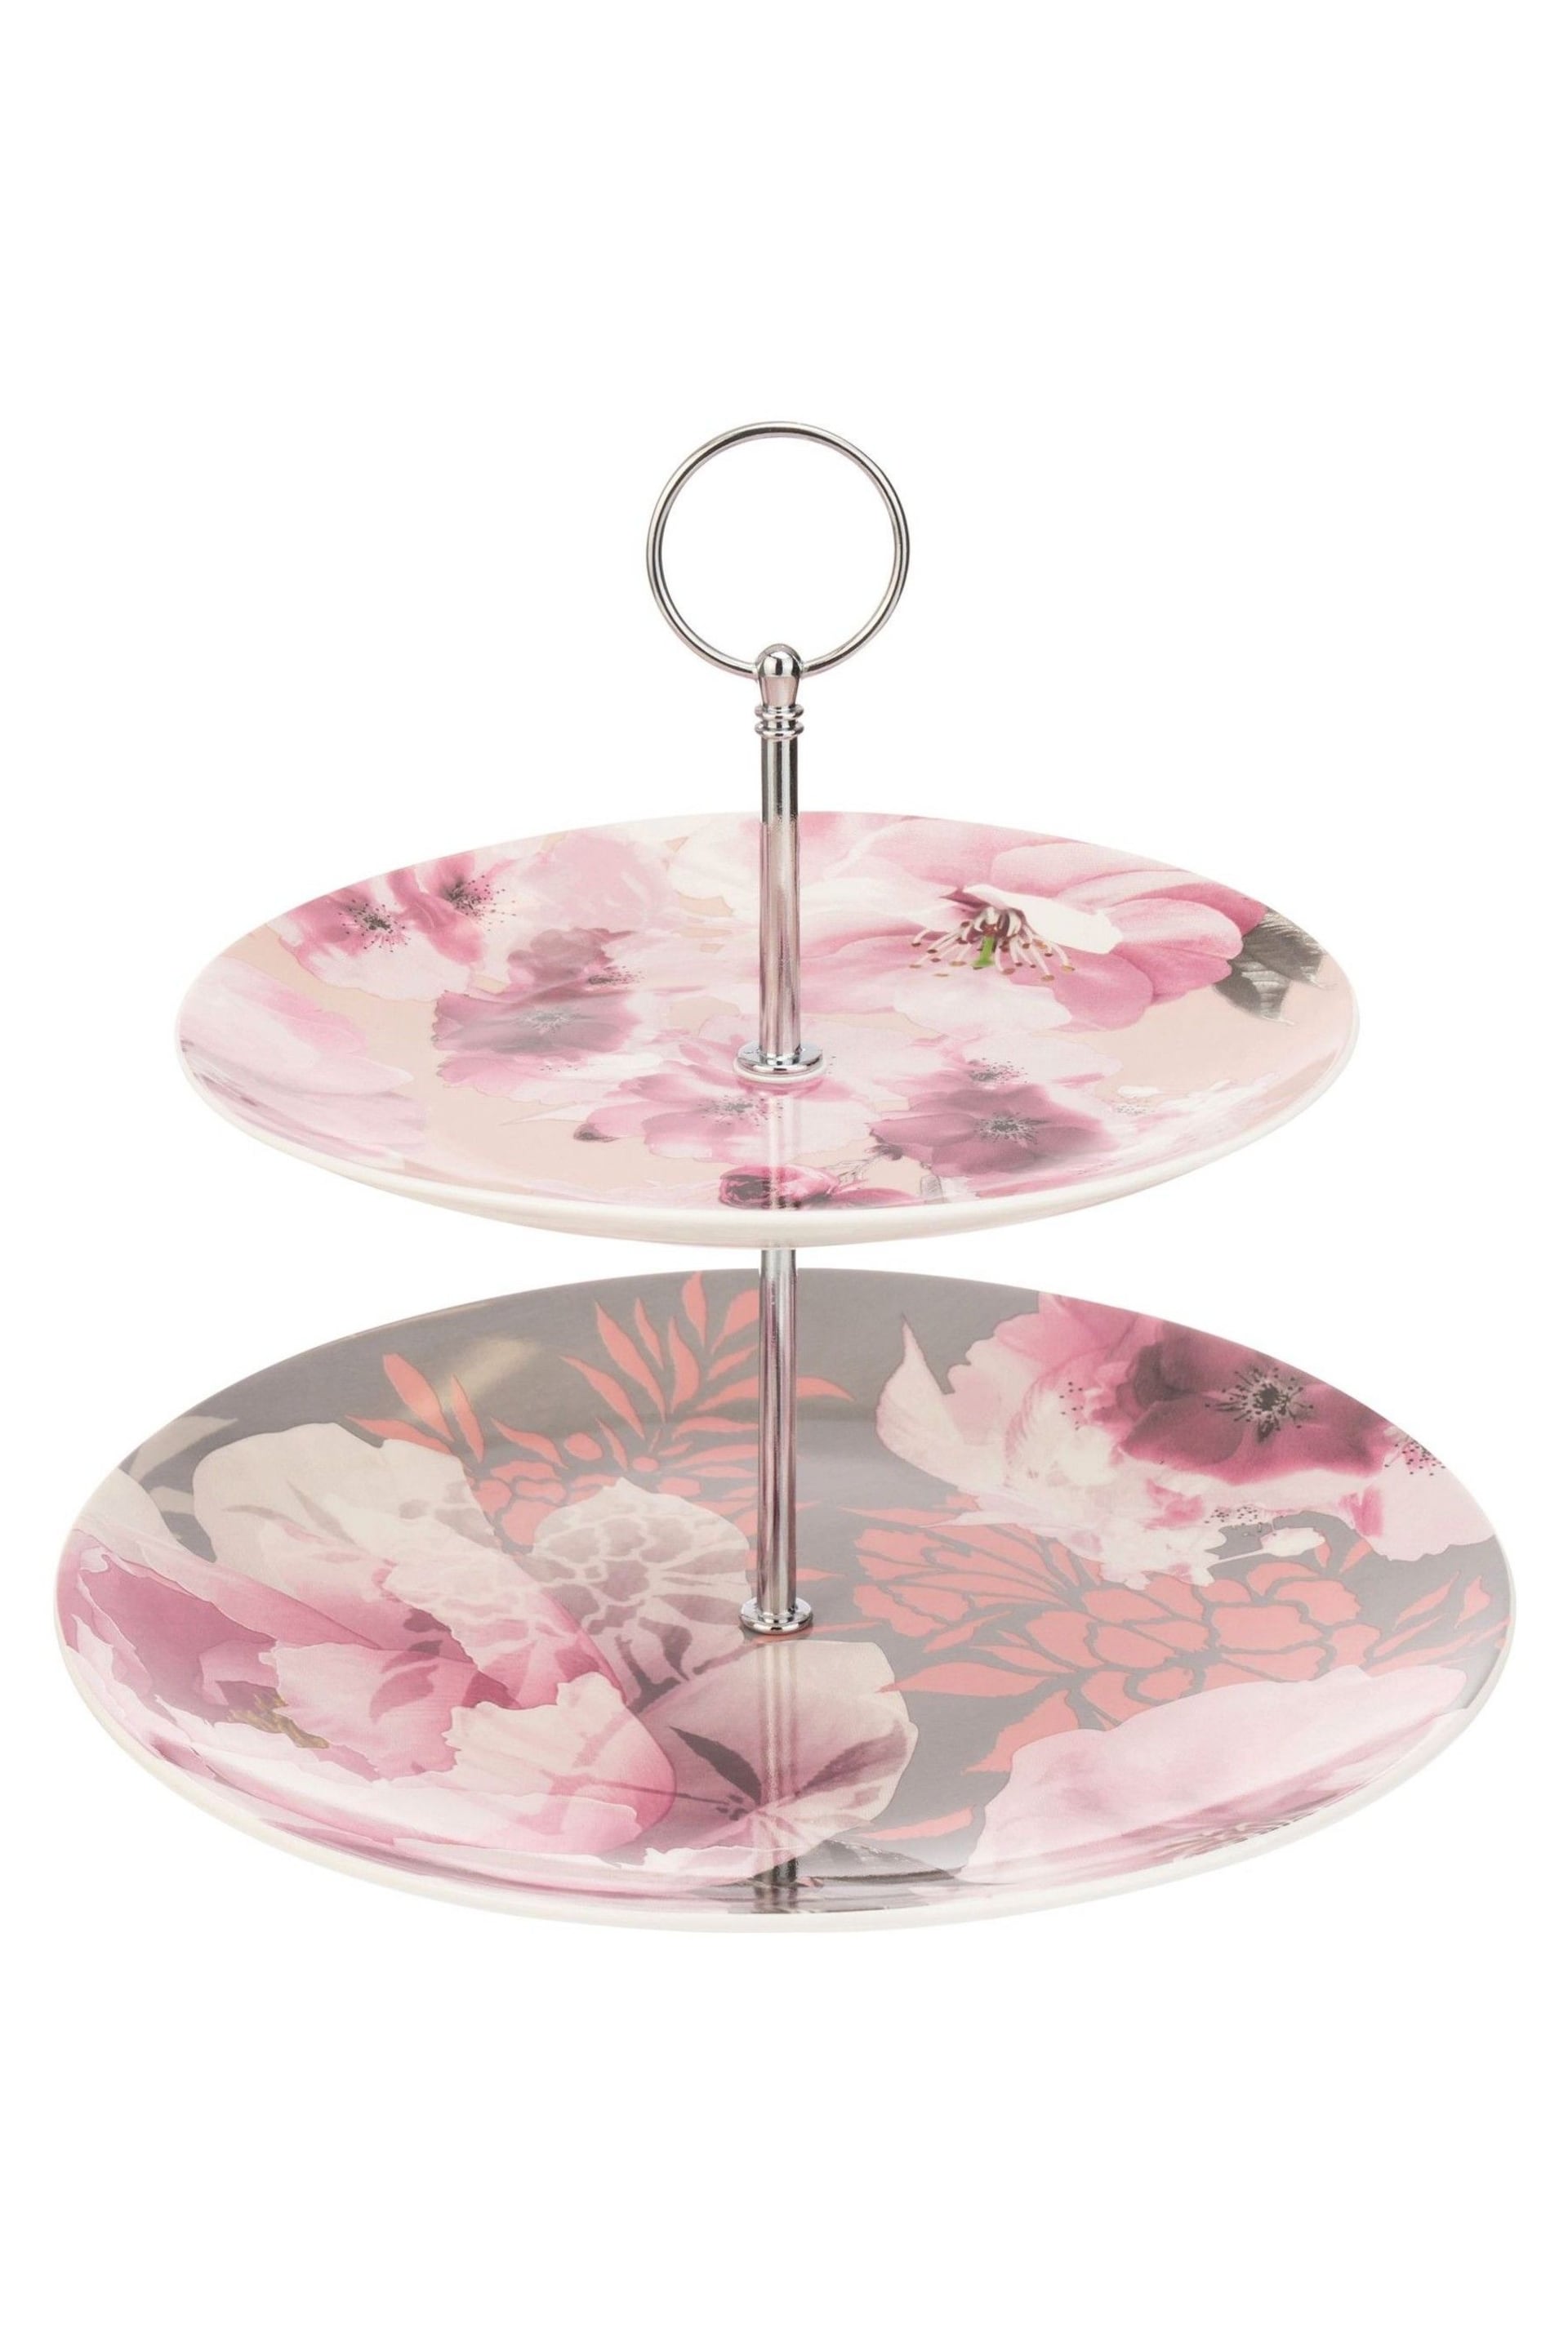 Catherine Lansfield Dramatic Floral 2 Tier Cake Stand - Image 2 of 2